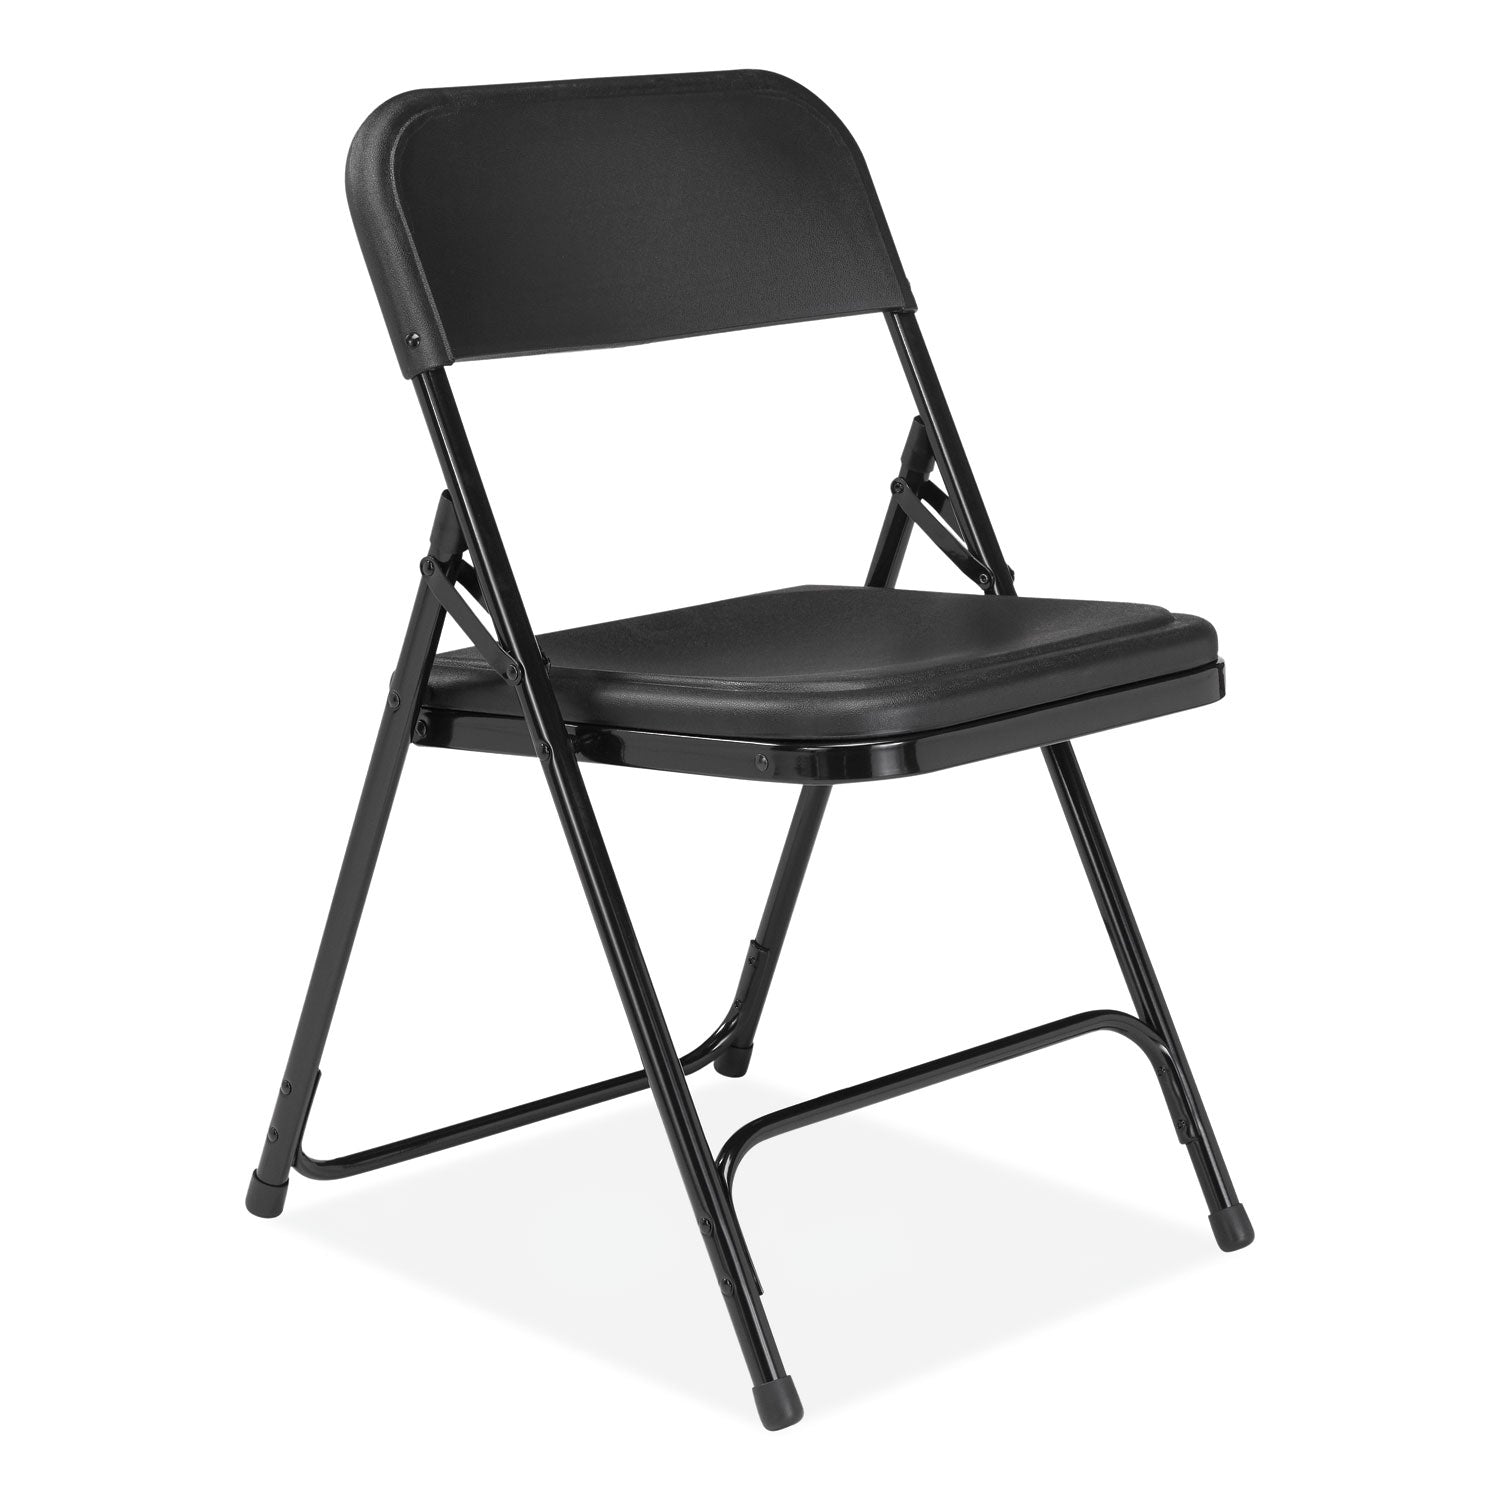 800-series-plastic-folding-chair-supports-500lb-18-seat-height-black-seat-back-black-base-4-ct-ships-in-1-3-bus-days_nps810 - 2